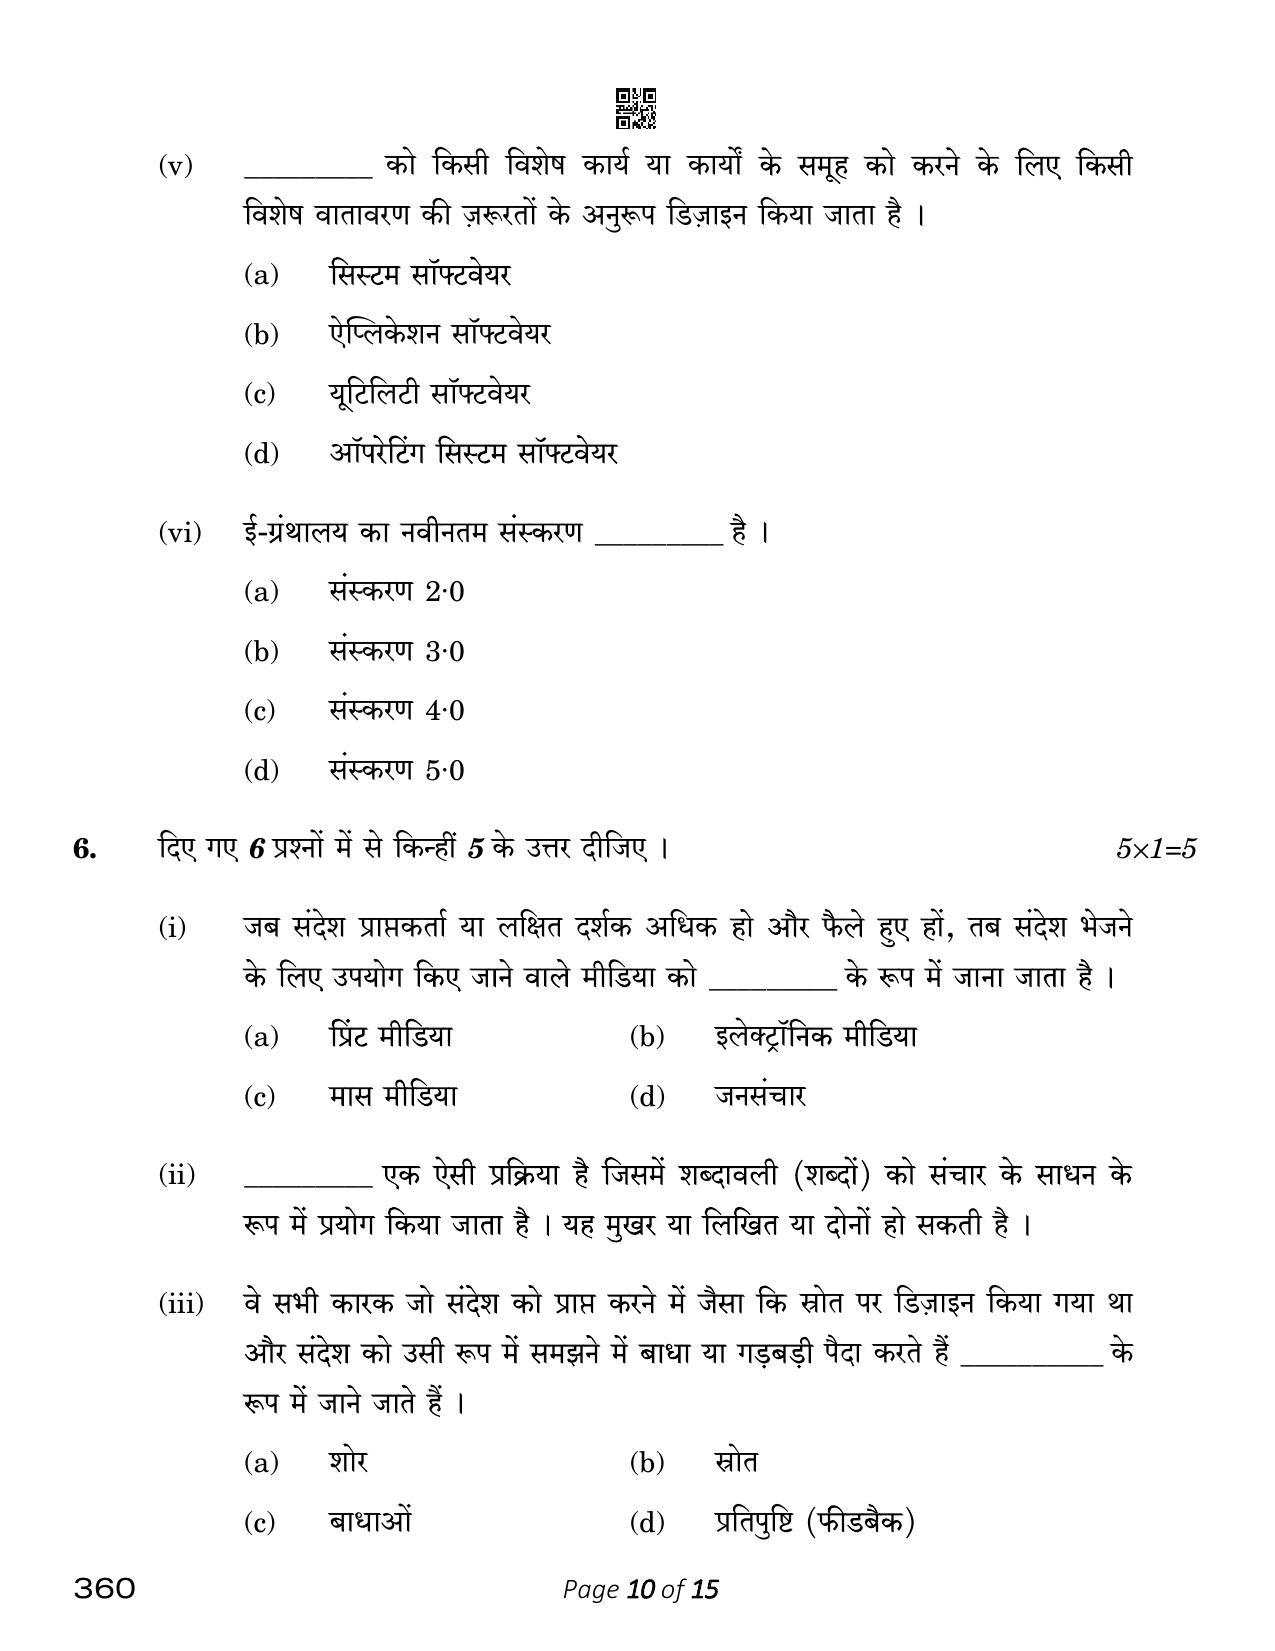 CBSE Class 12 Library And Information Science (Compartment) 2023 Question Paper - Page 10